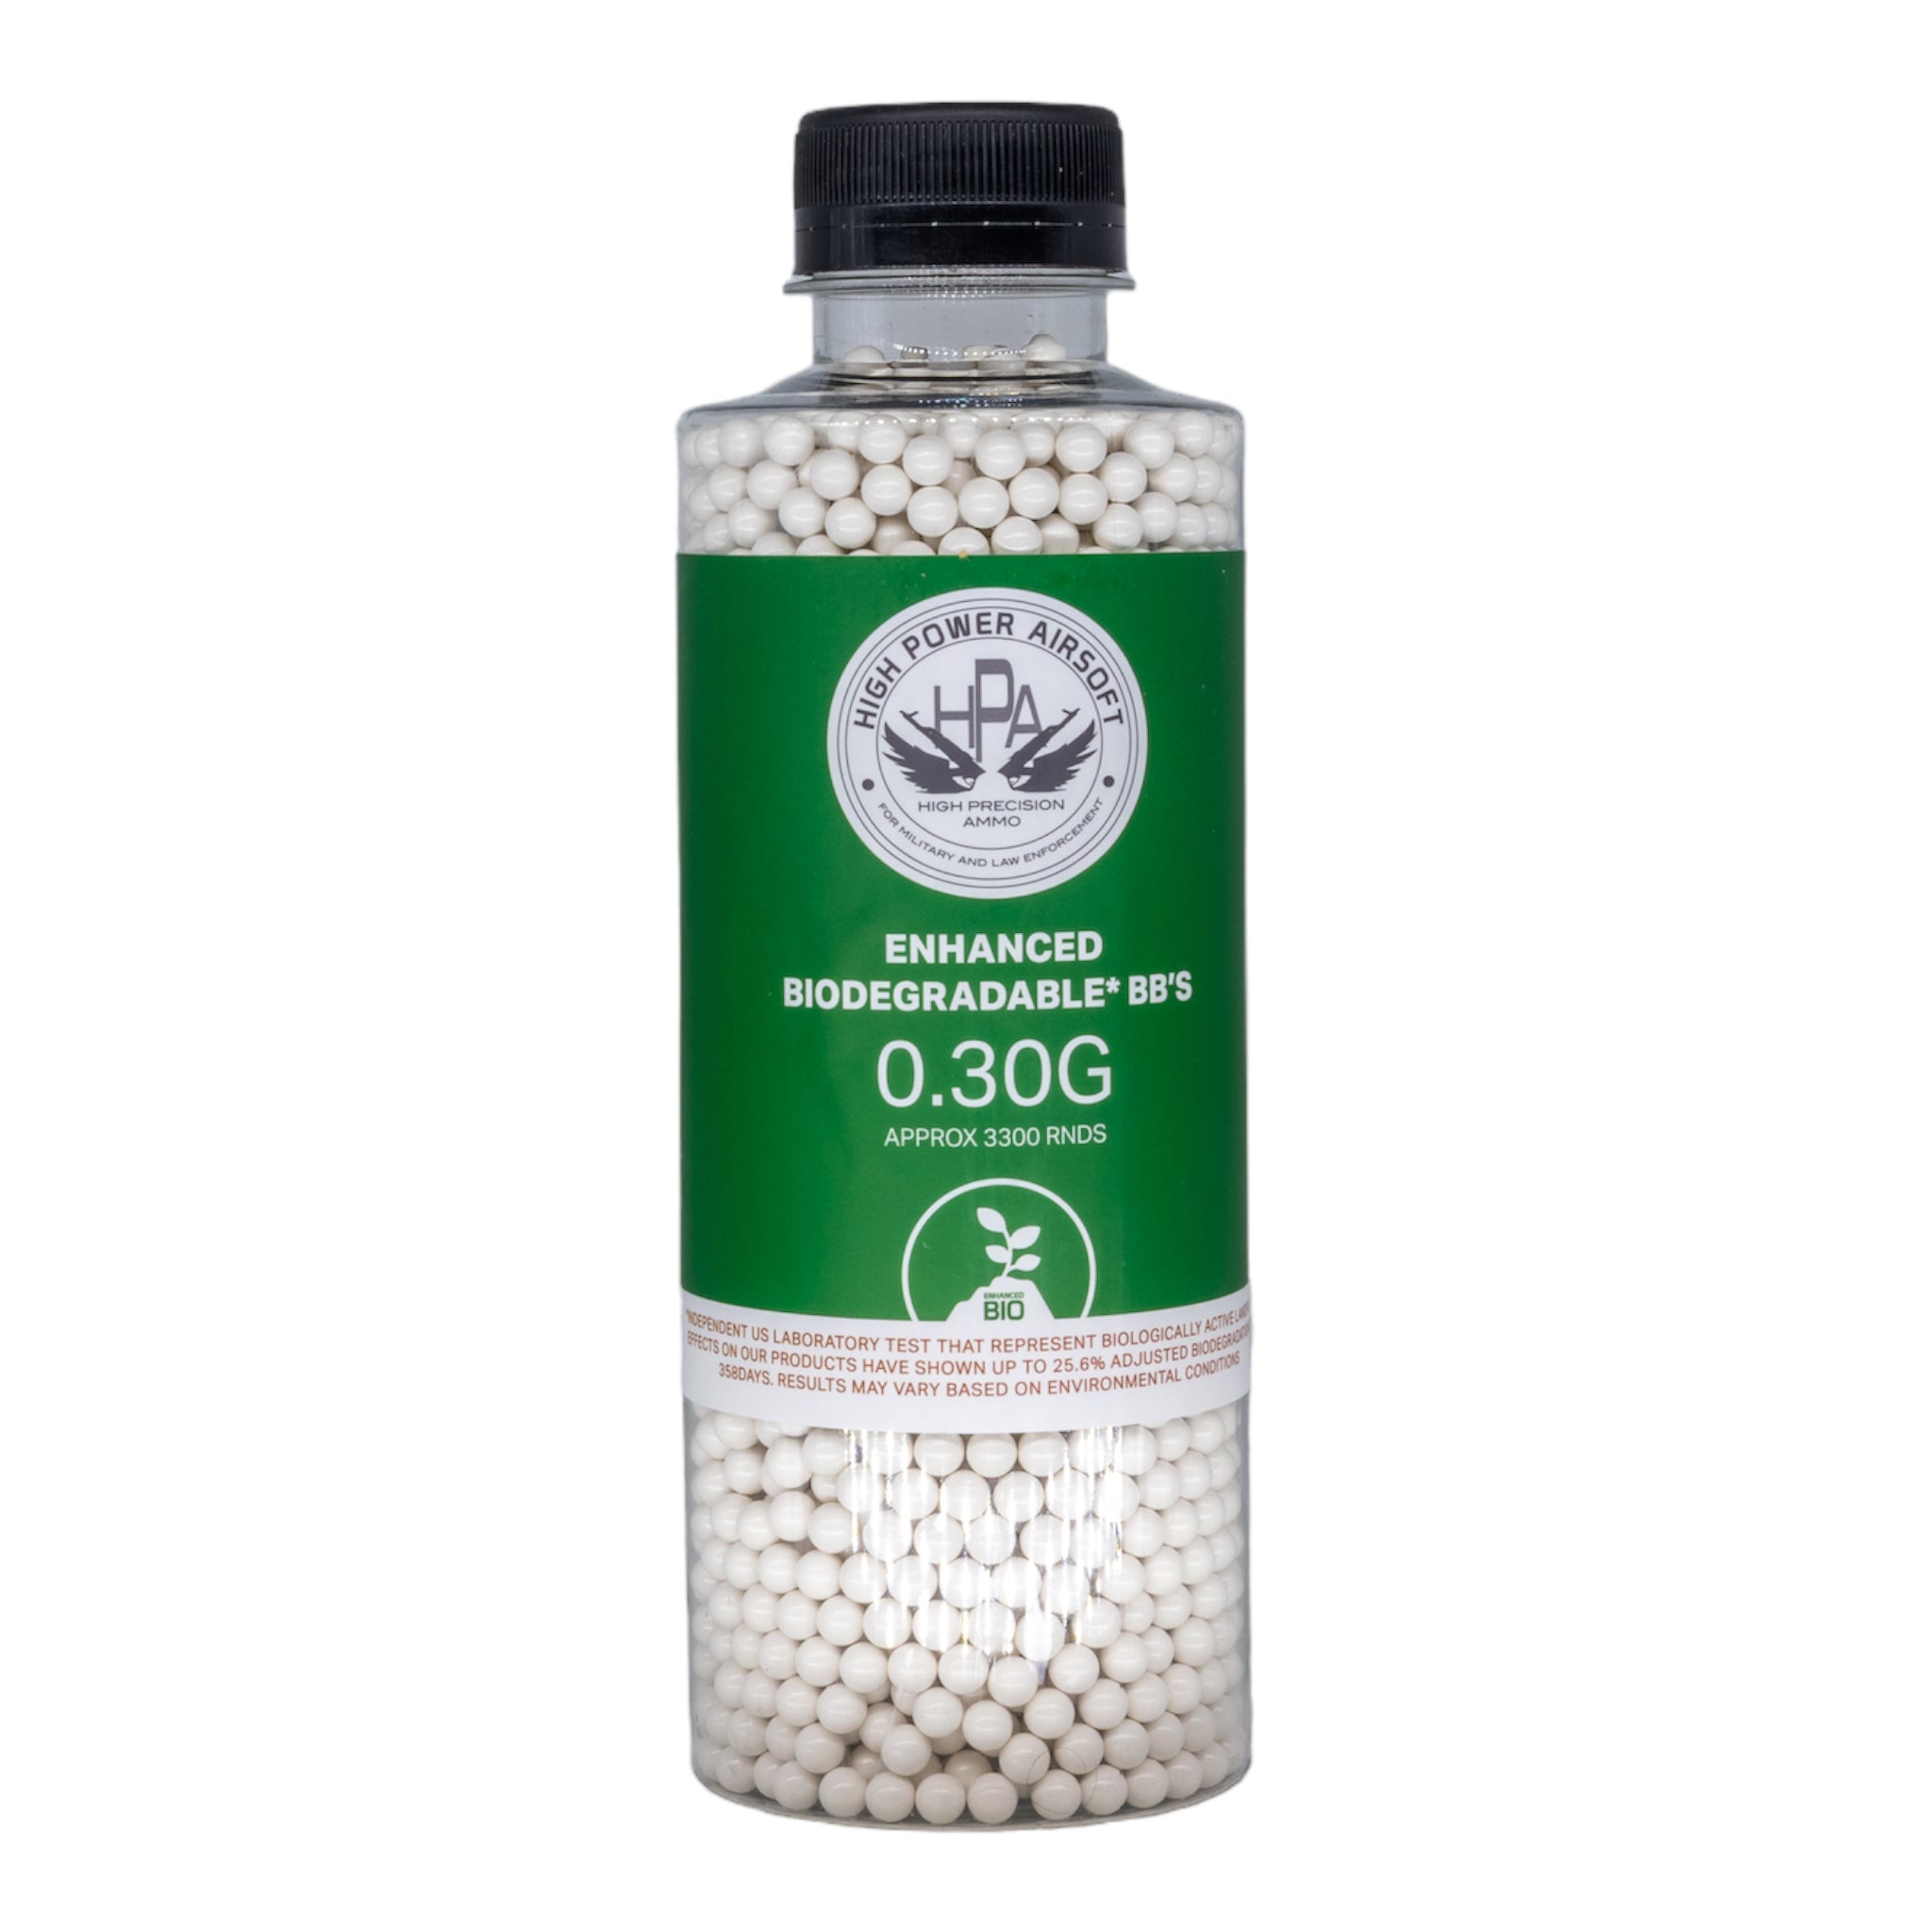 HPA 6mm 3300 Count Biodegradable BB's 0.30g - ssairsoft.com